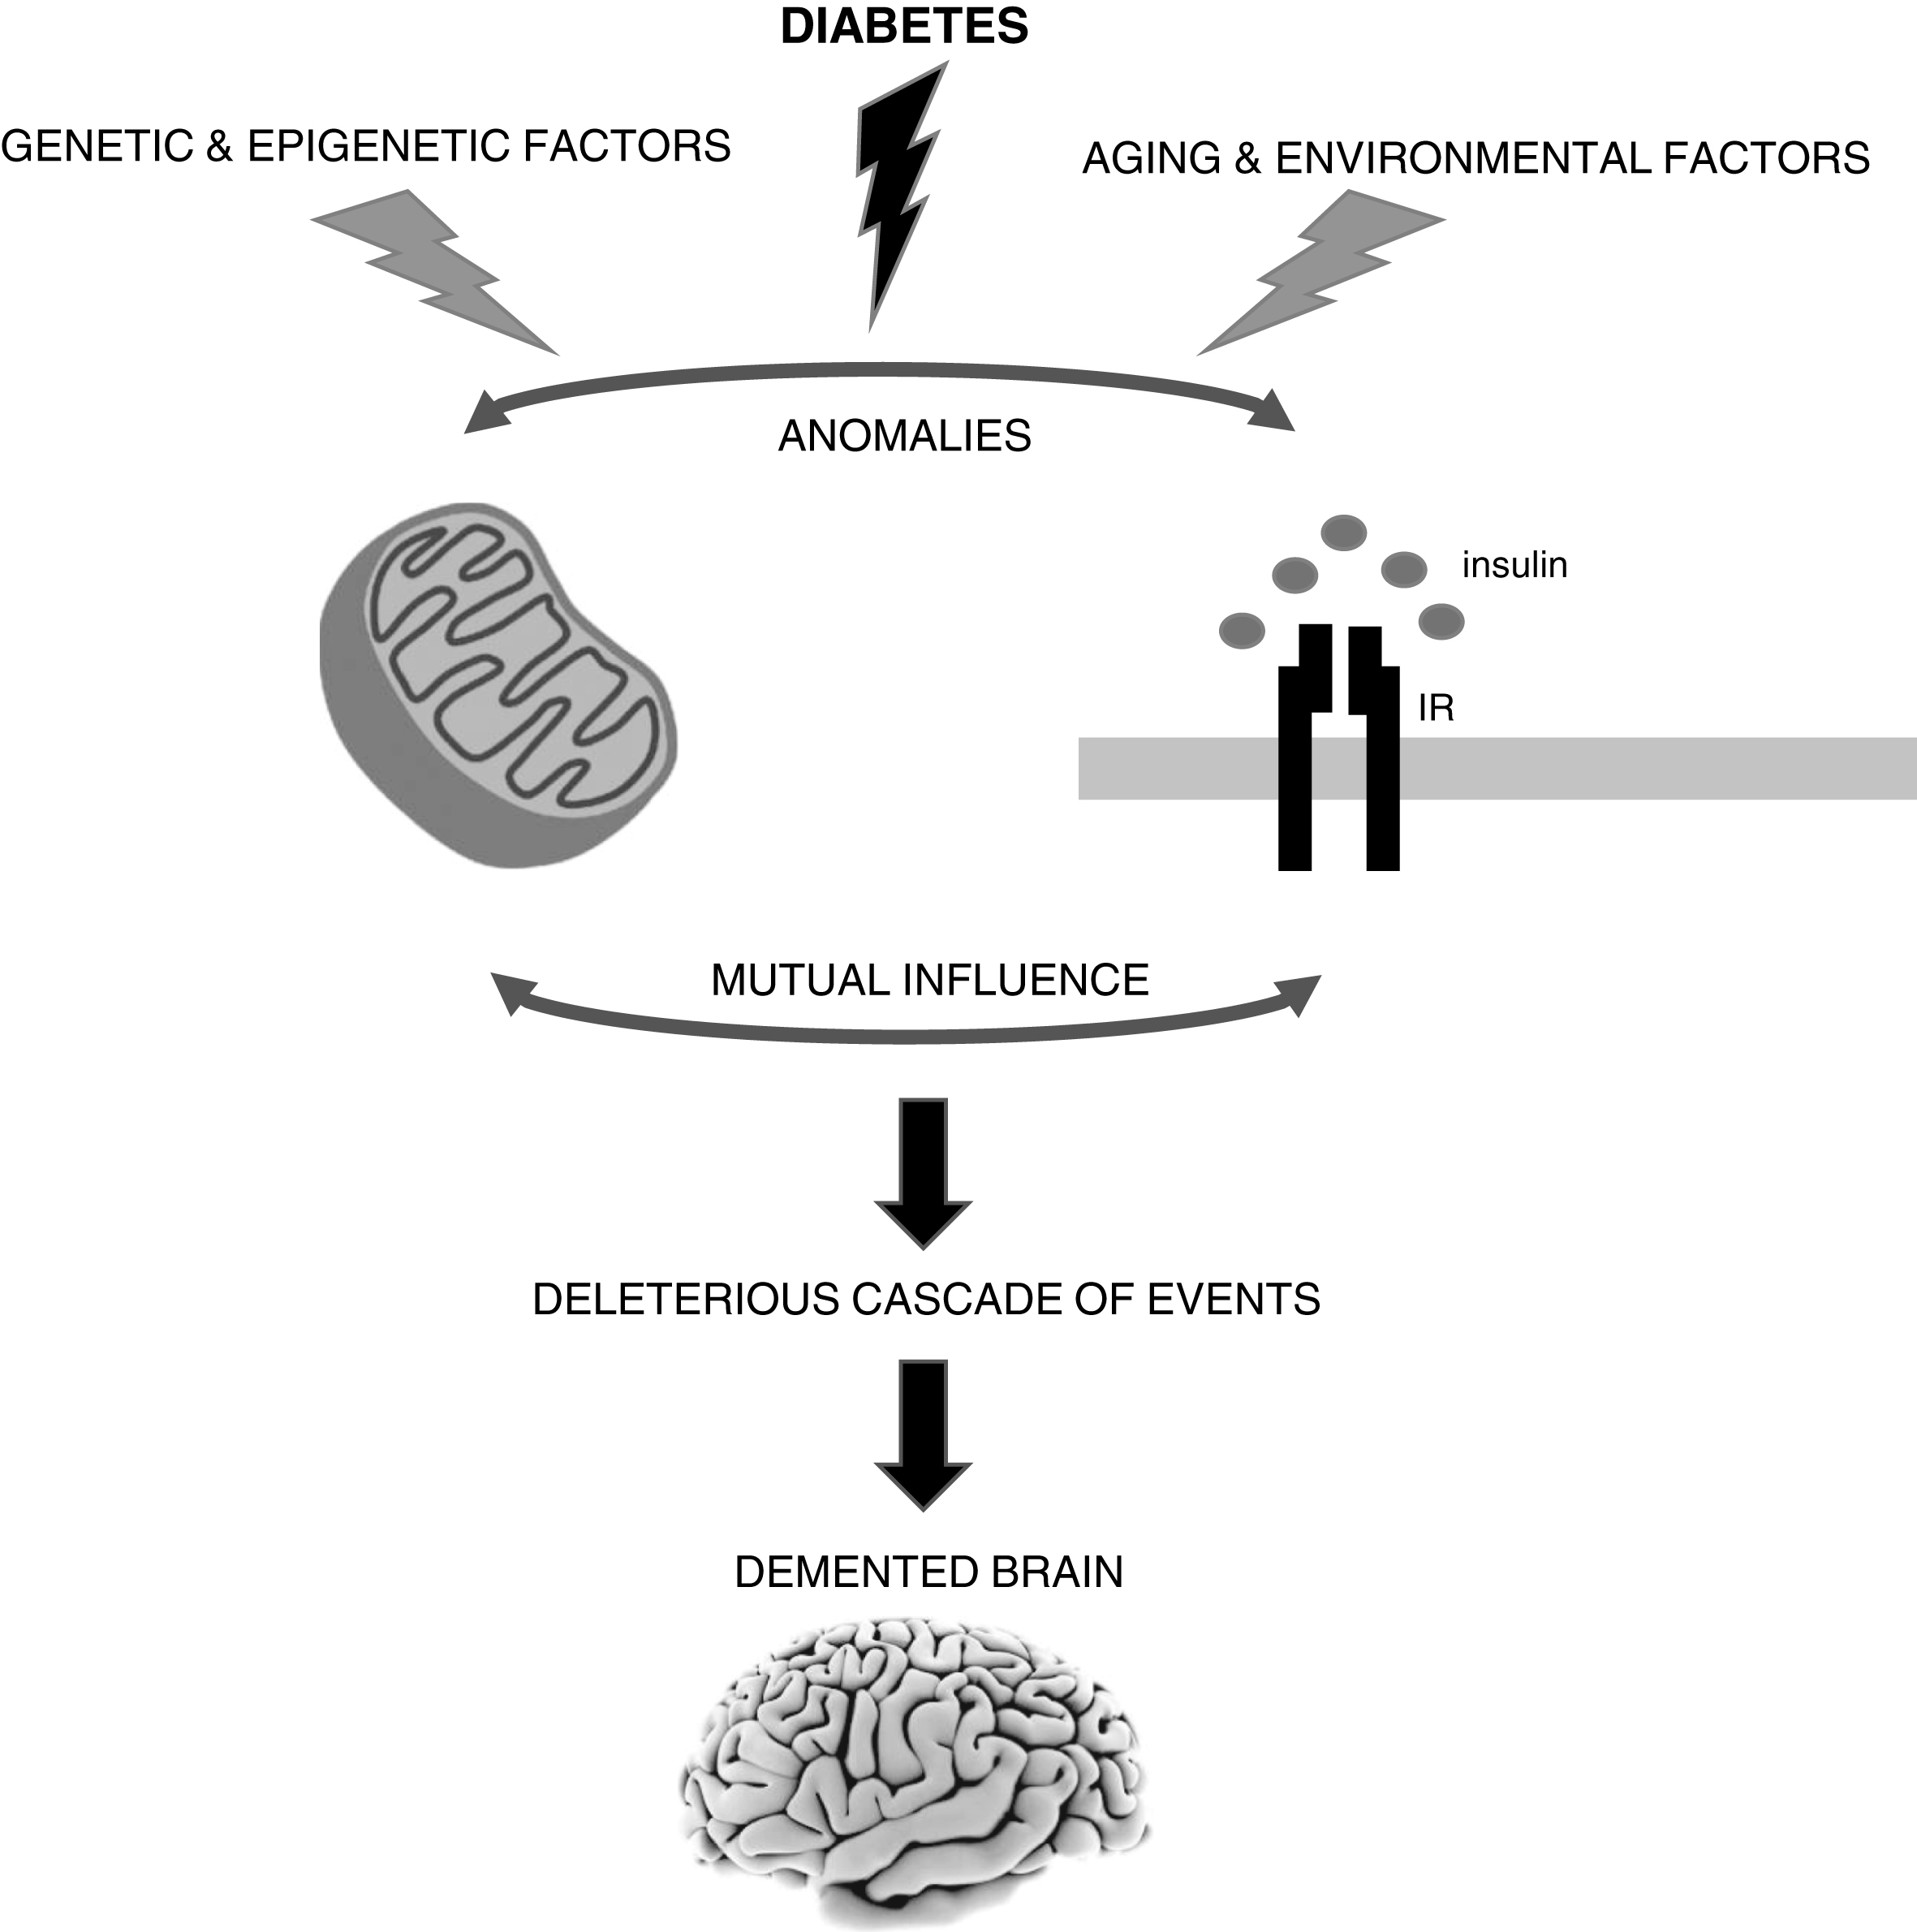 The brain is highly vulnerable to mitochondrial defects since neurons rely almost exclusively in the mitochondrial oxidative phosphorylation system to obtain ATP to fulfill their high energy needs. Accumulating evidence shows that mitochondrial alterations caused by diabetes can contribute to neurodegenerative events such as Alzheimer’s disease (AD). However, it remains uncertain whether defective mitochondria are the initiating defect or secondary to altered insulin signaling. In fact, both insulin signaling and mitochondria defects can affect each other. It is also important to note that sporadic AD is a multifactorial condition that depends on the complex interplay between environmental, genetic and epigenetic factors. IR, insulin receptor.